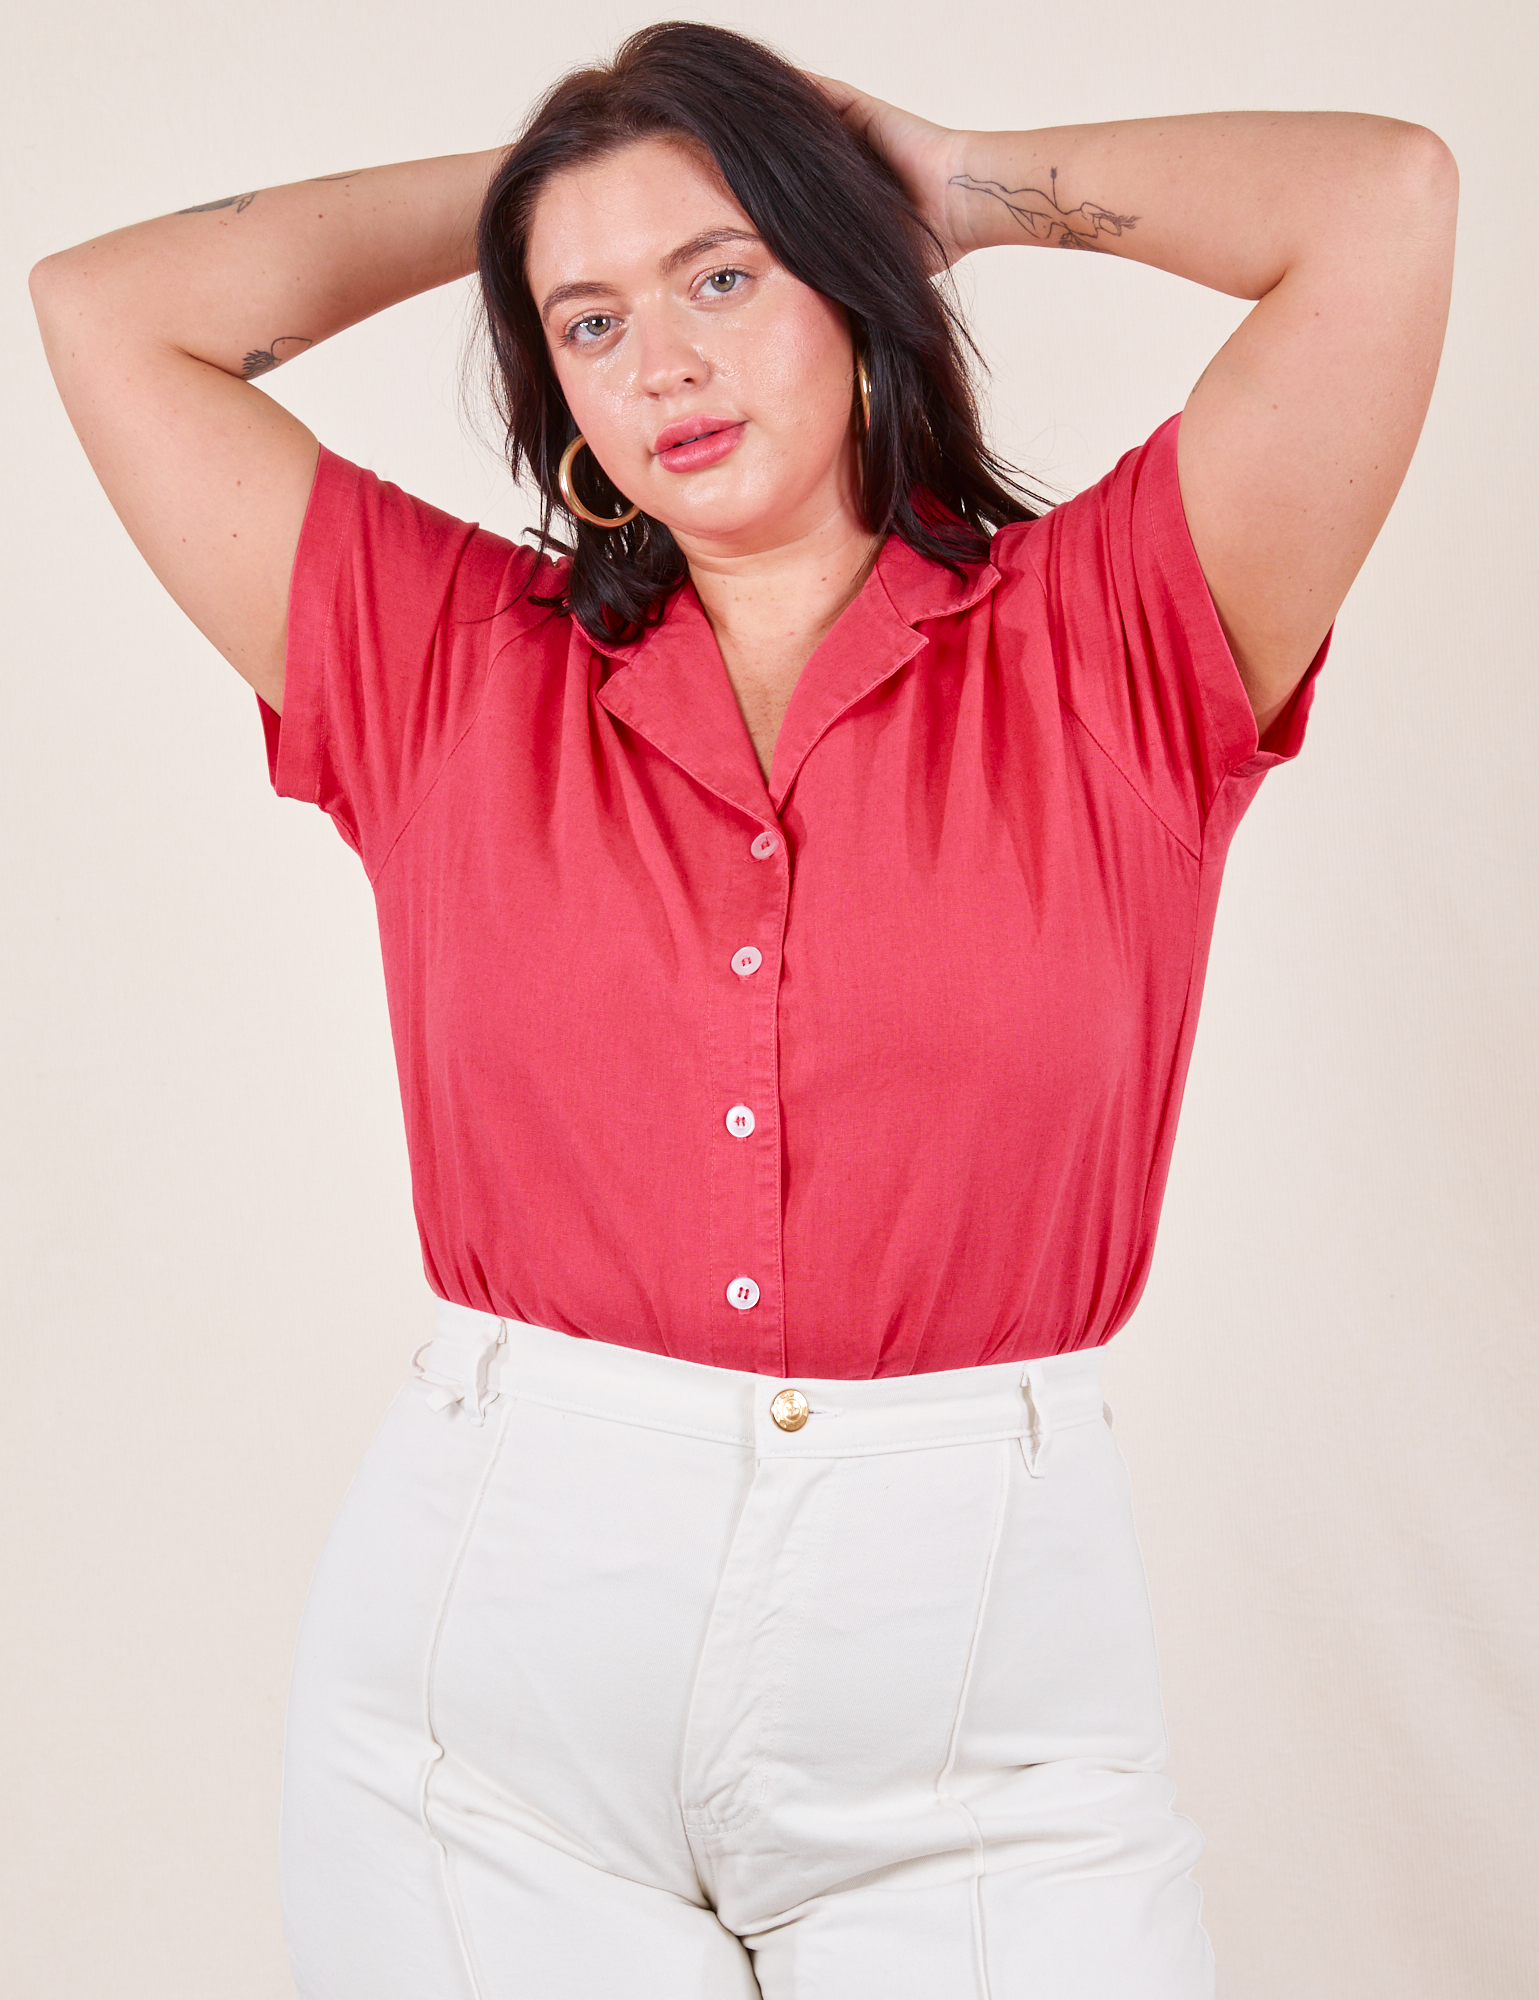 Faye is wearing M Pantry Button-Up in Hot Pink tucked into vintage off-white Western Pants